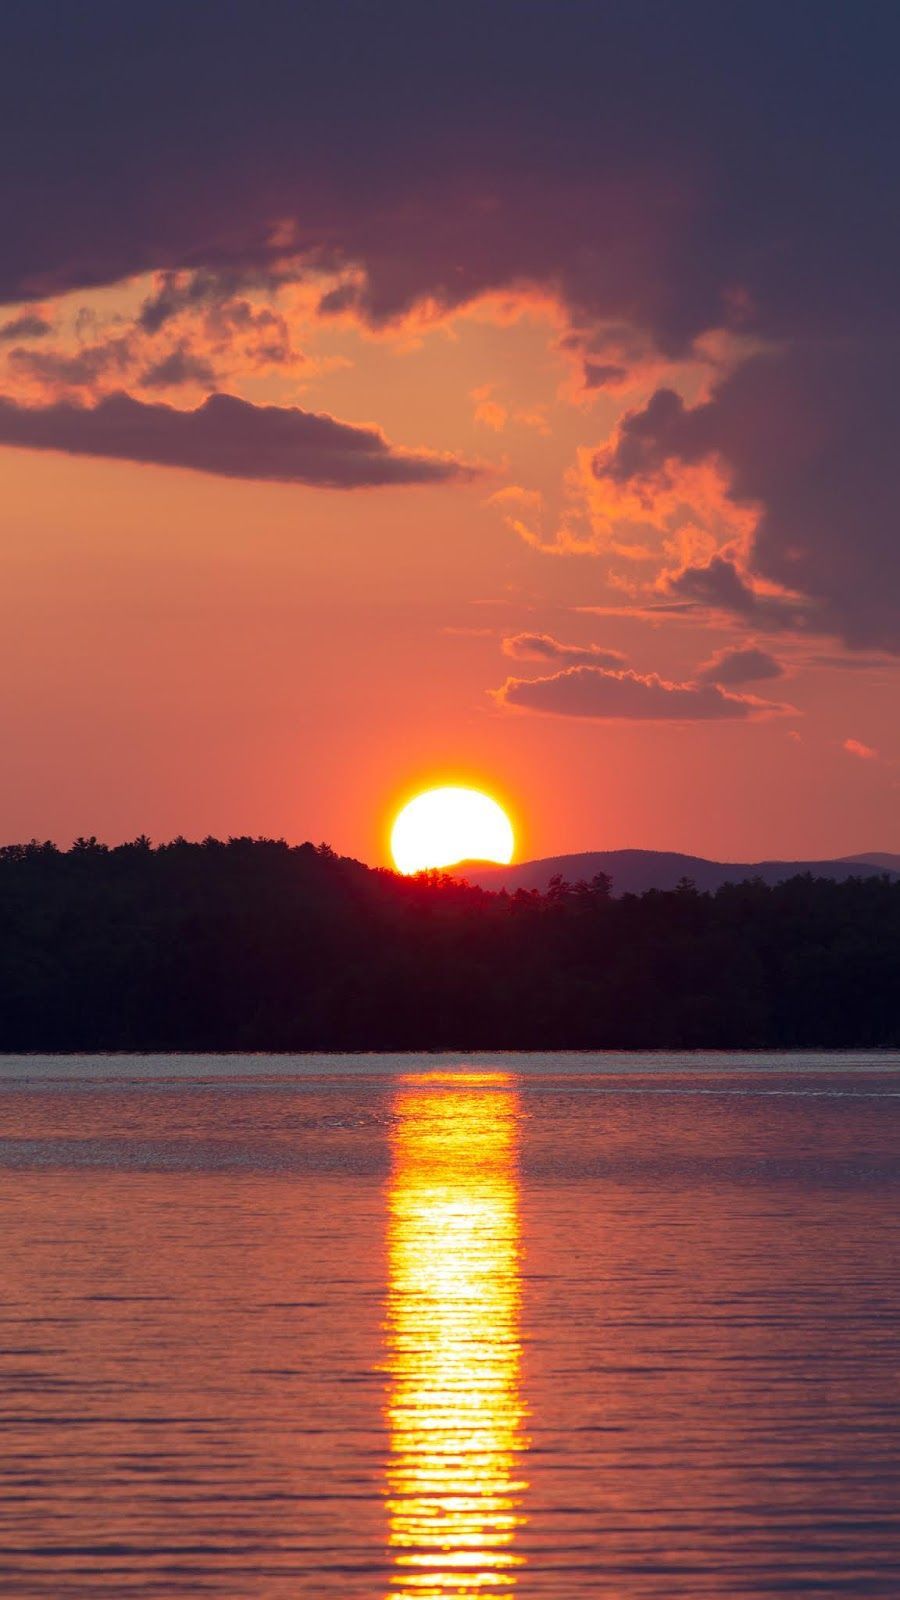 A sunset over the water with trees in background - Lake